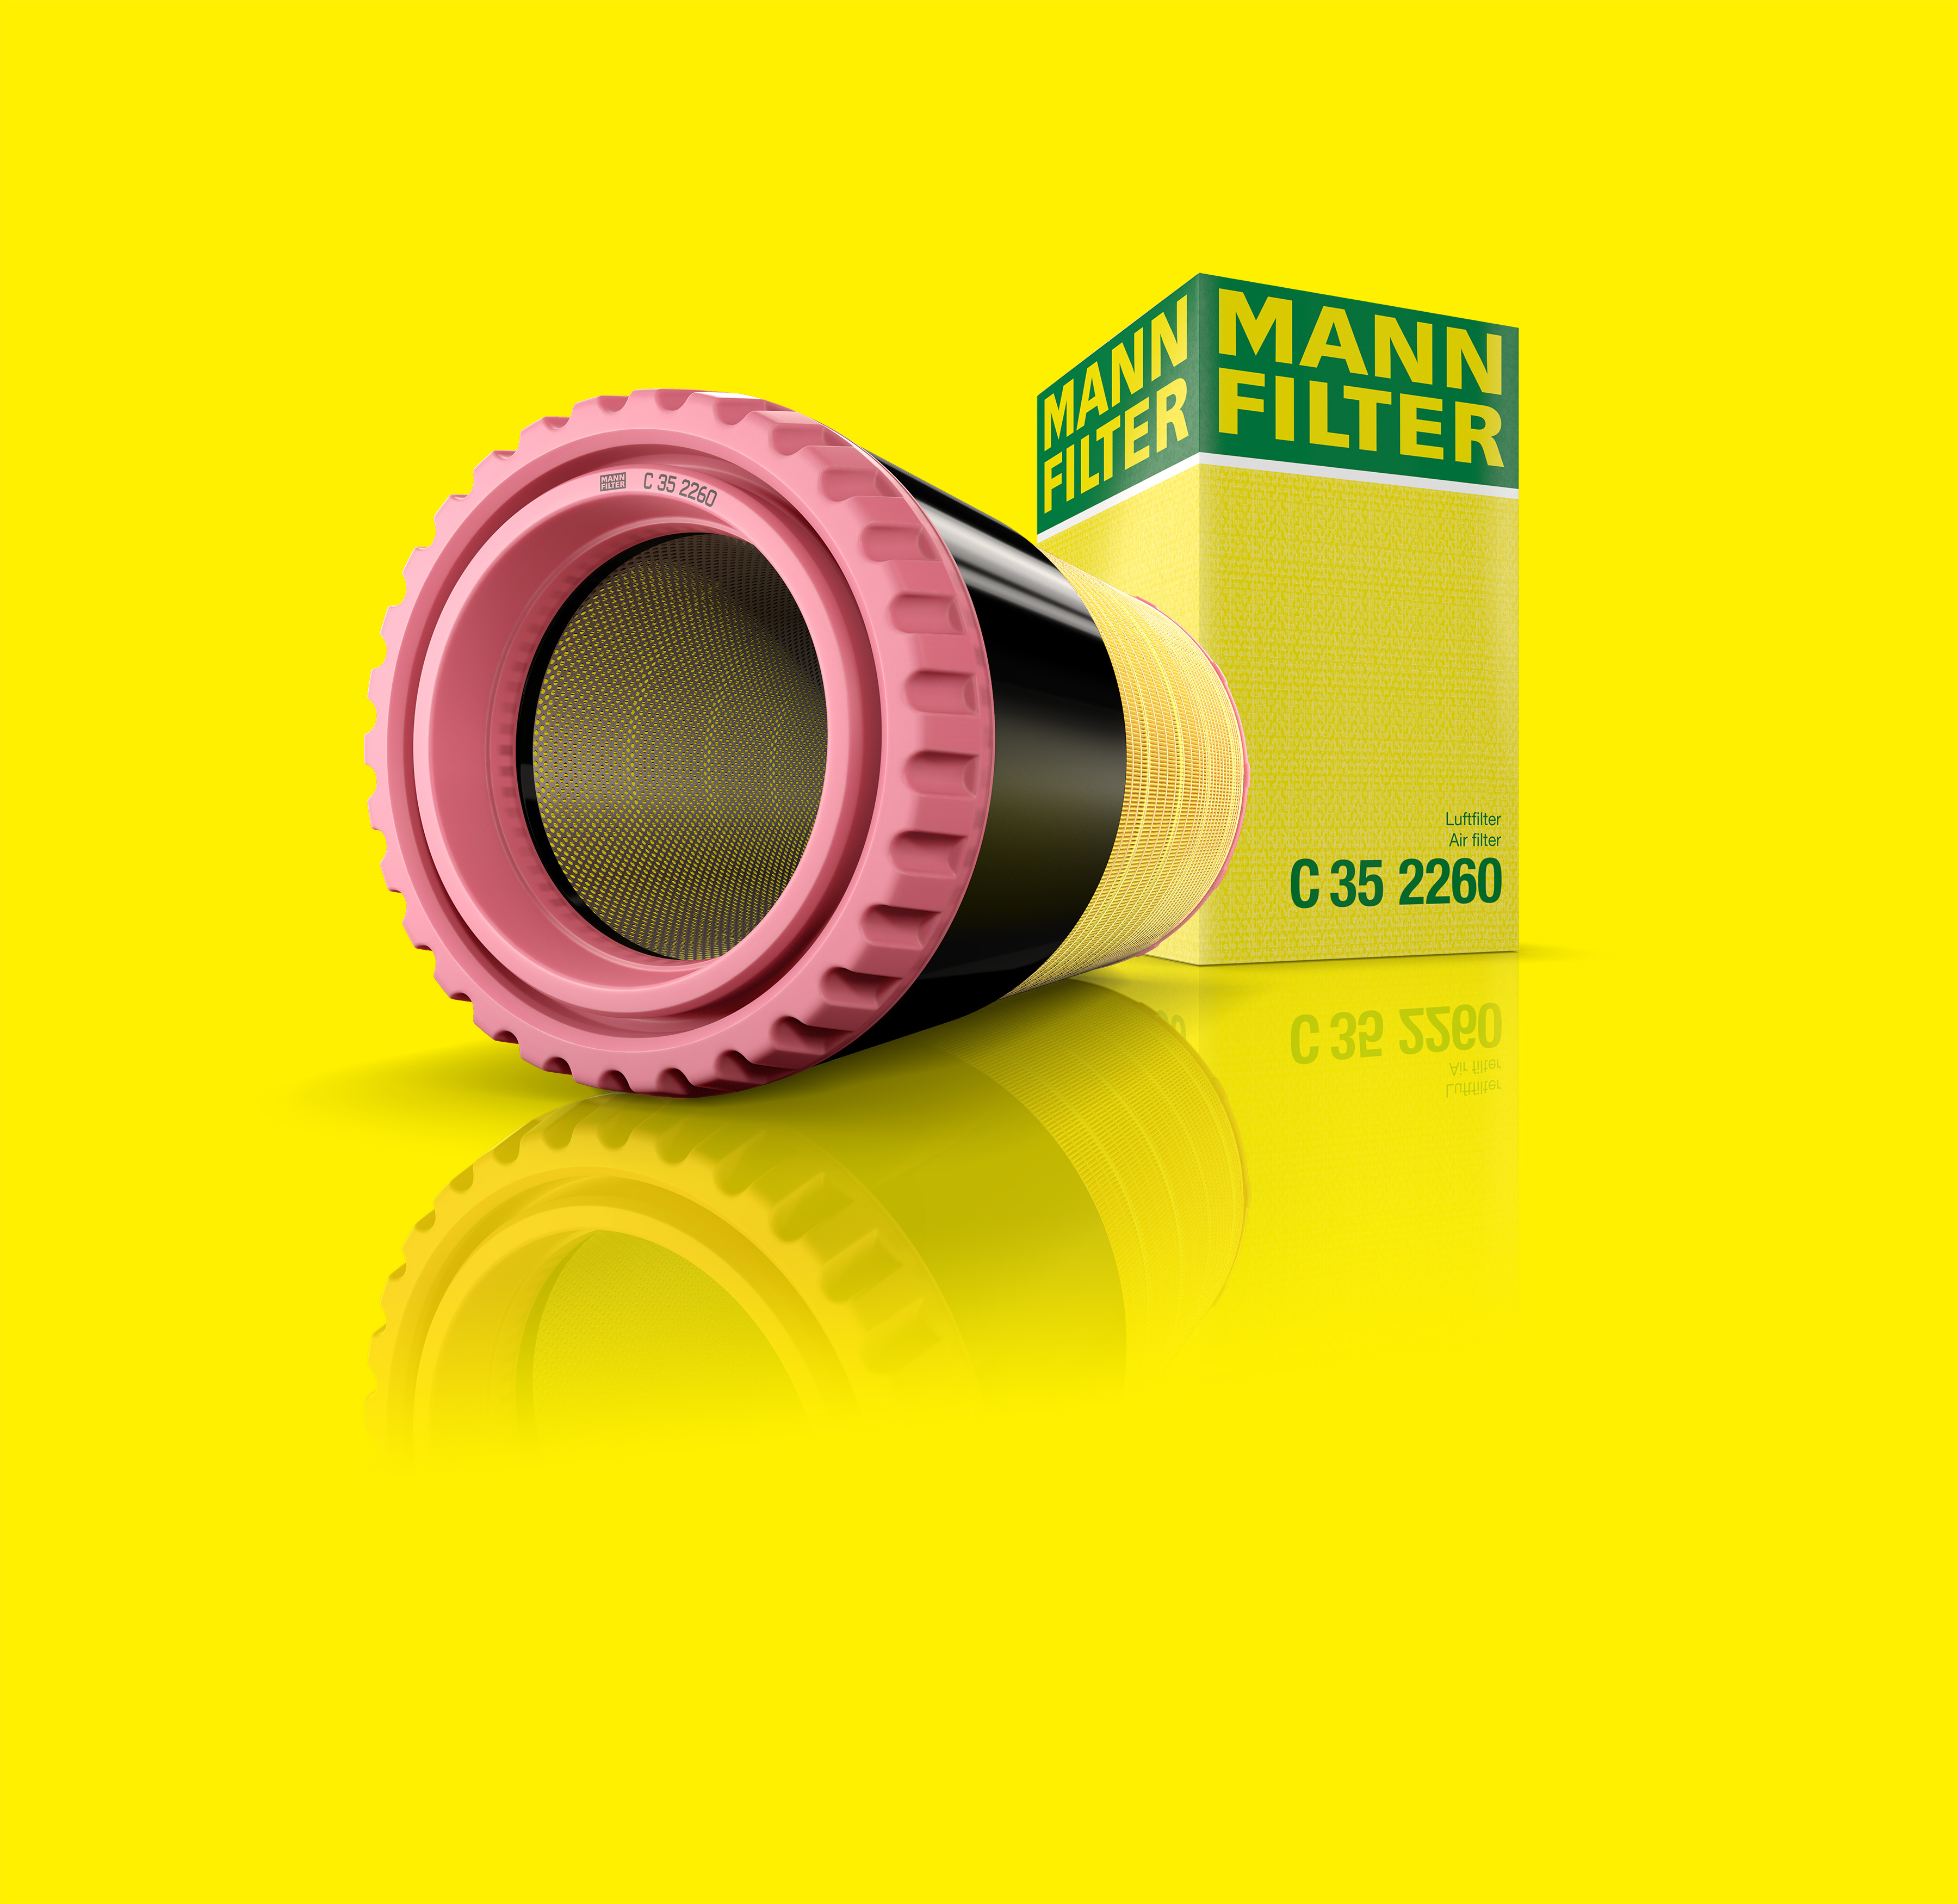 An elongated filter with pink and black accent against yellow background and reflective bottom next to the package